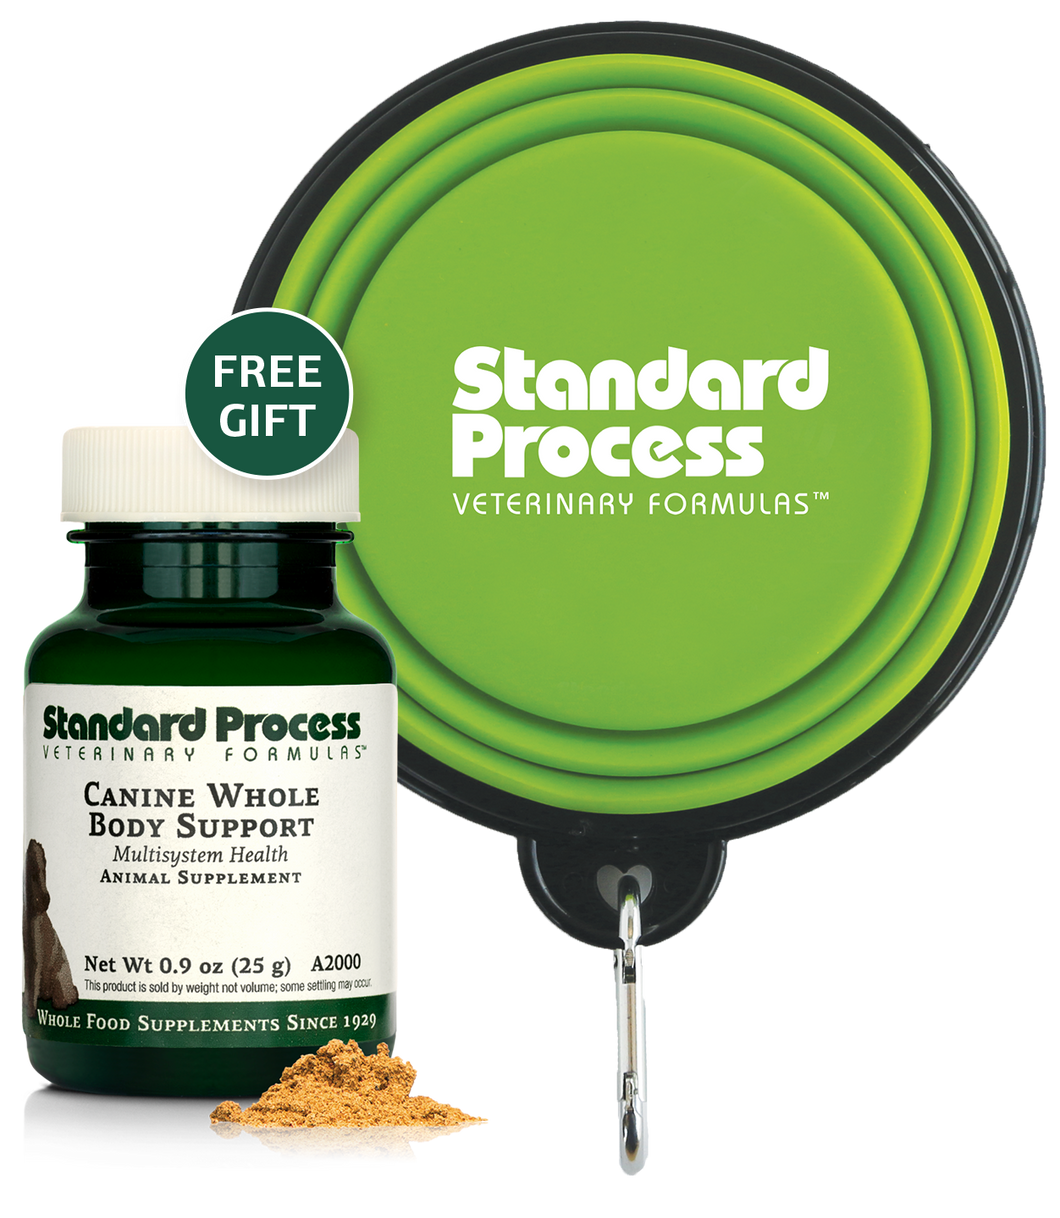 Standard Process Canine Small Bottle Promo